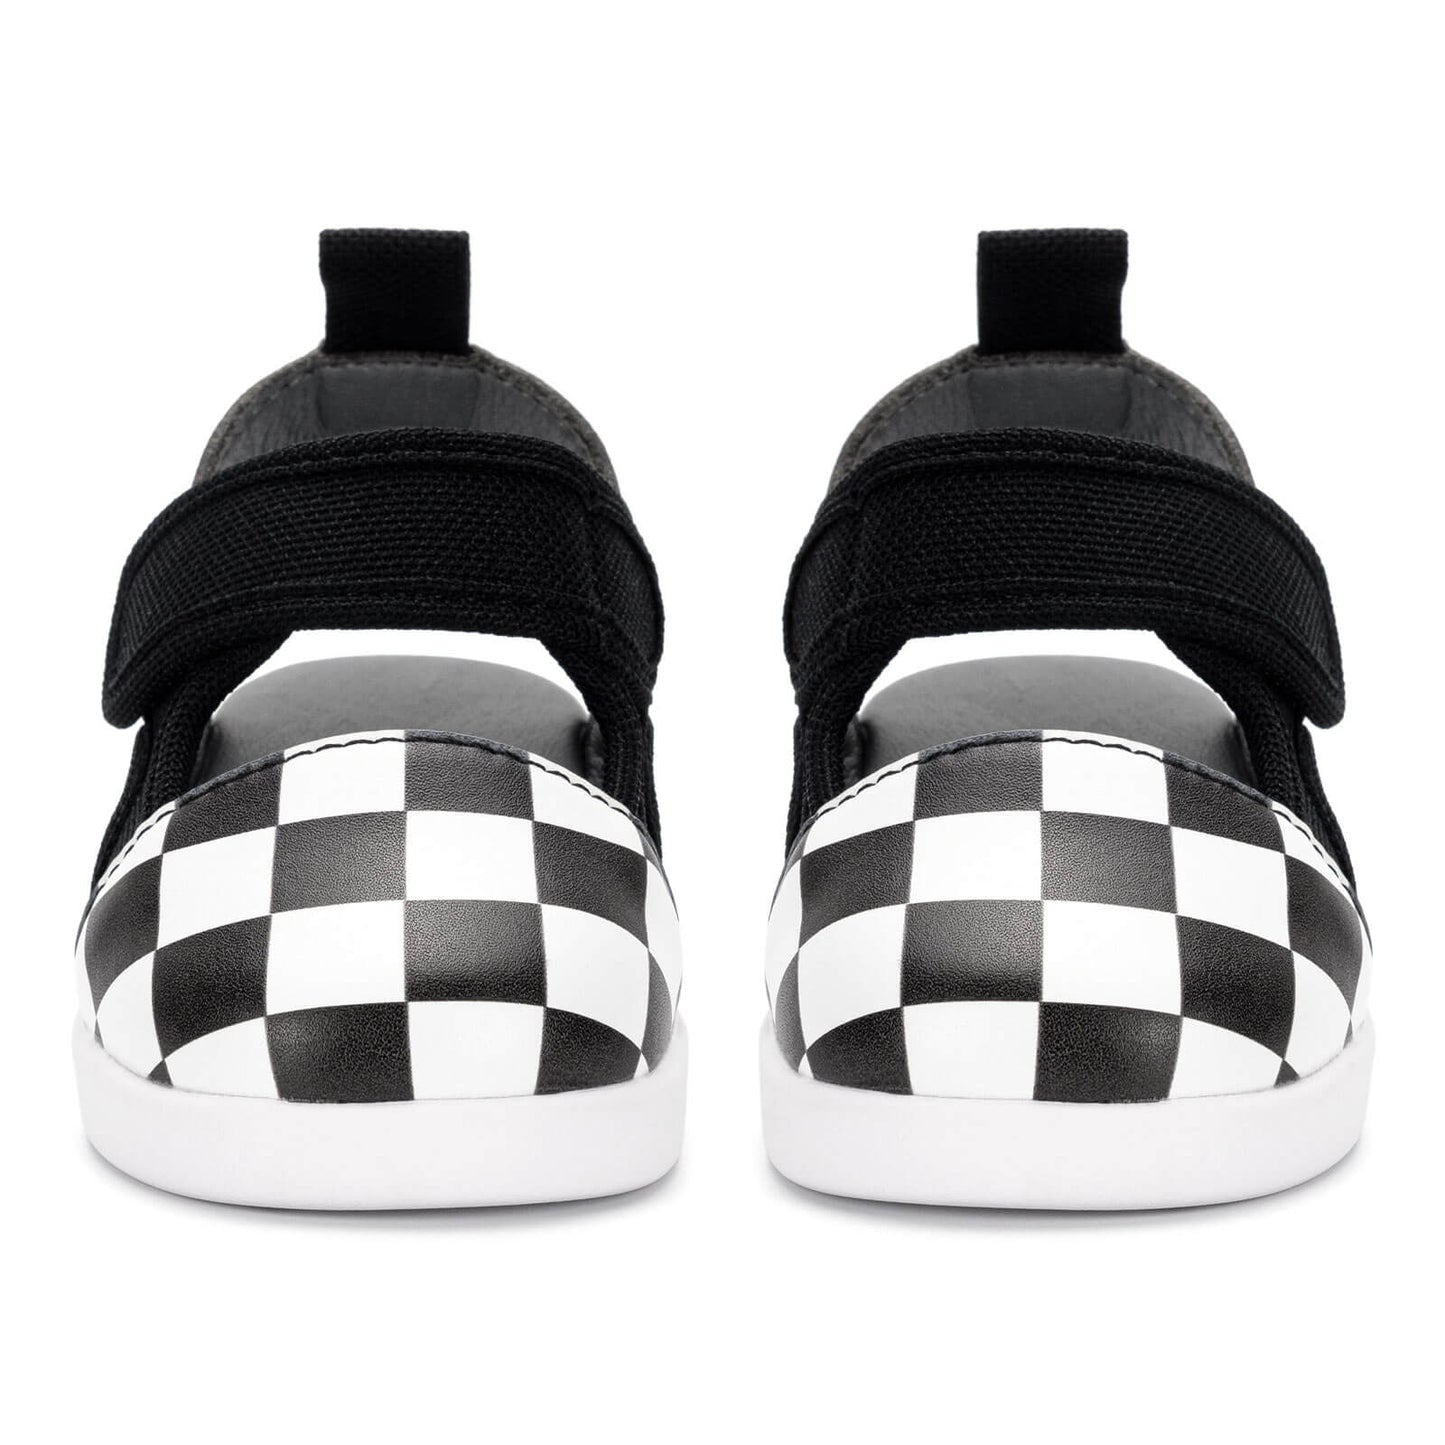 Shoes, Buckled Checkered Sandals